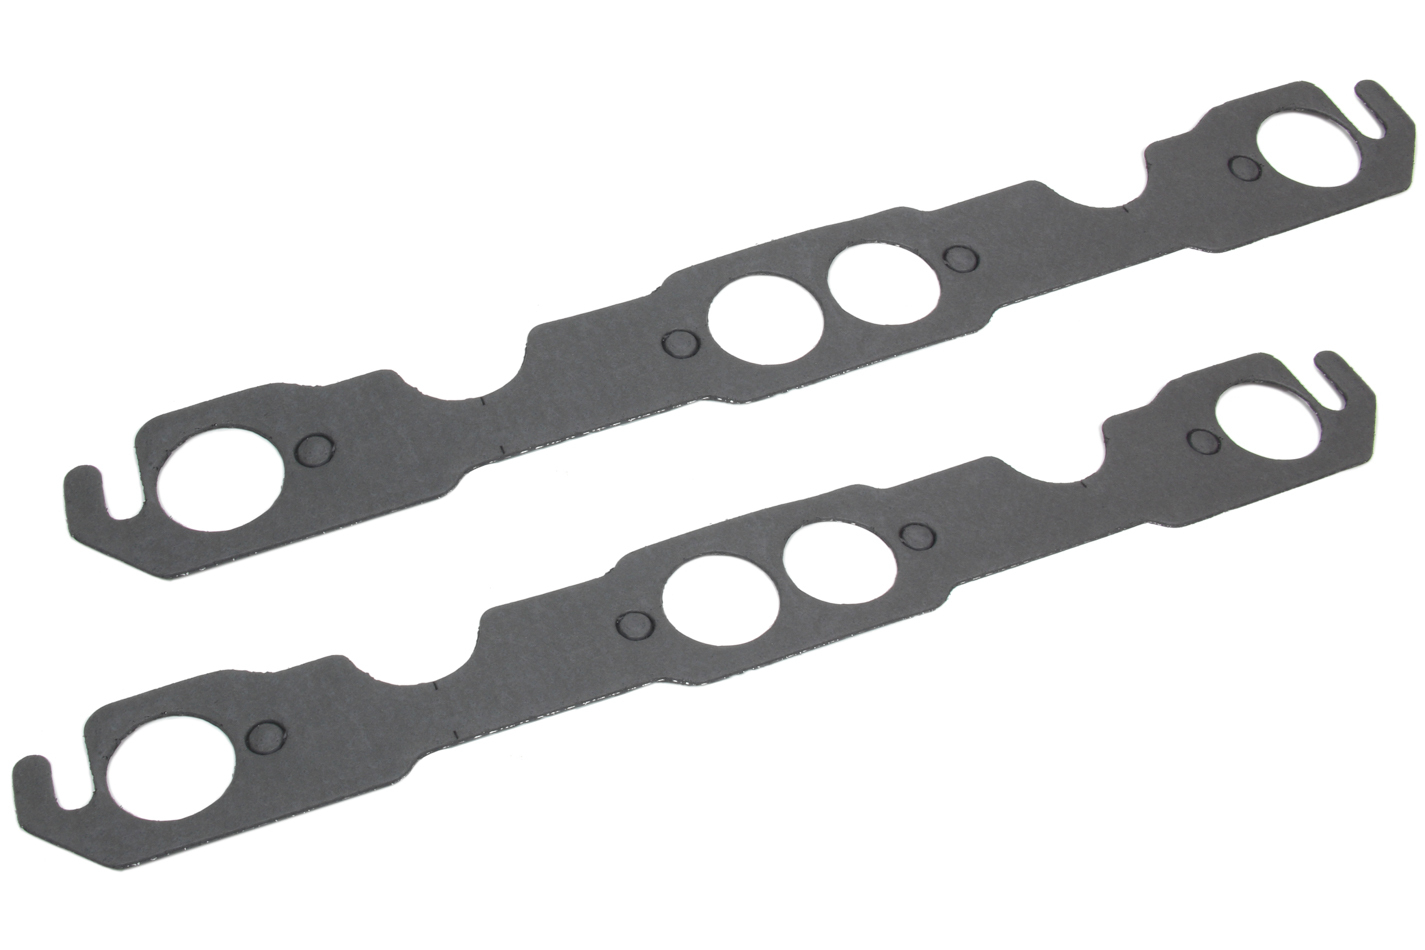 Hedman Hedders 27560 - Exhaust Manifold / Header Gasket, 1.750 in Square Port, Composite, Small Block Chevy, Pair